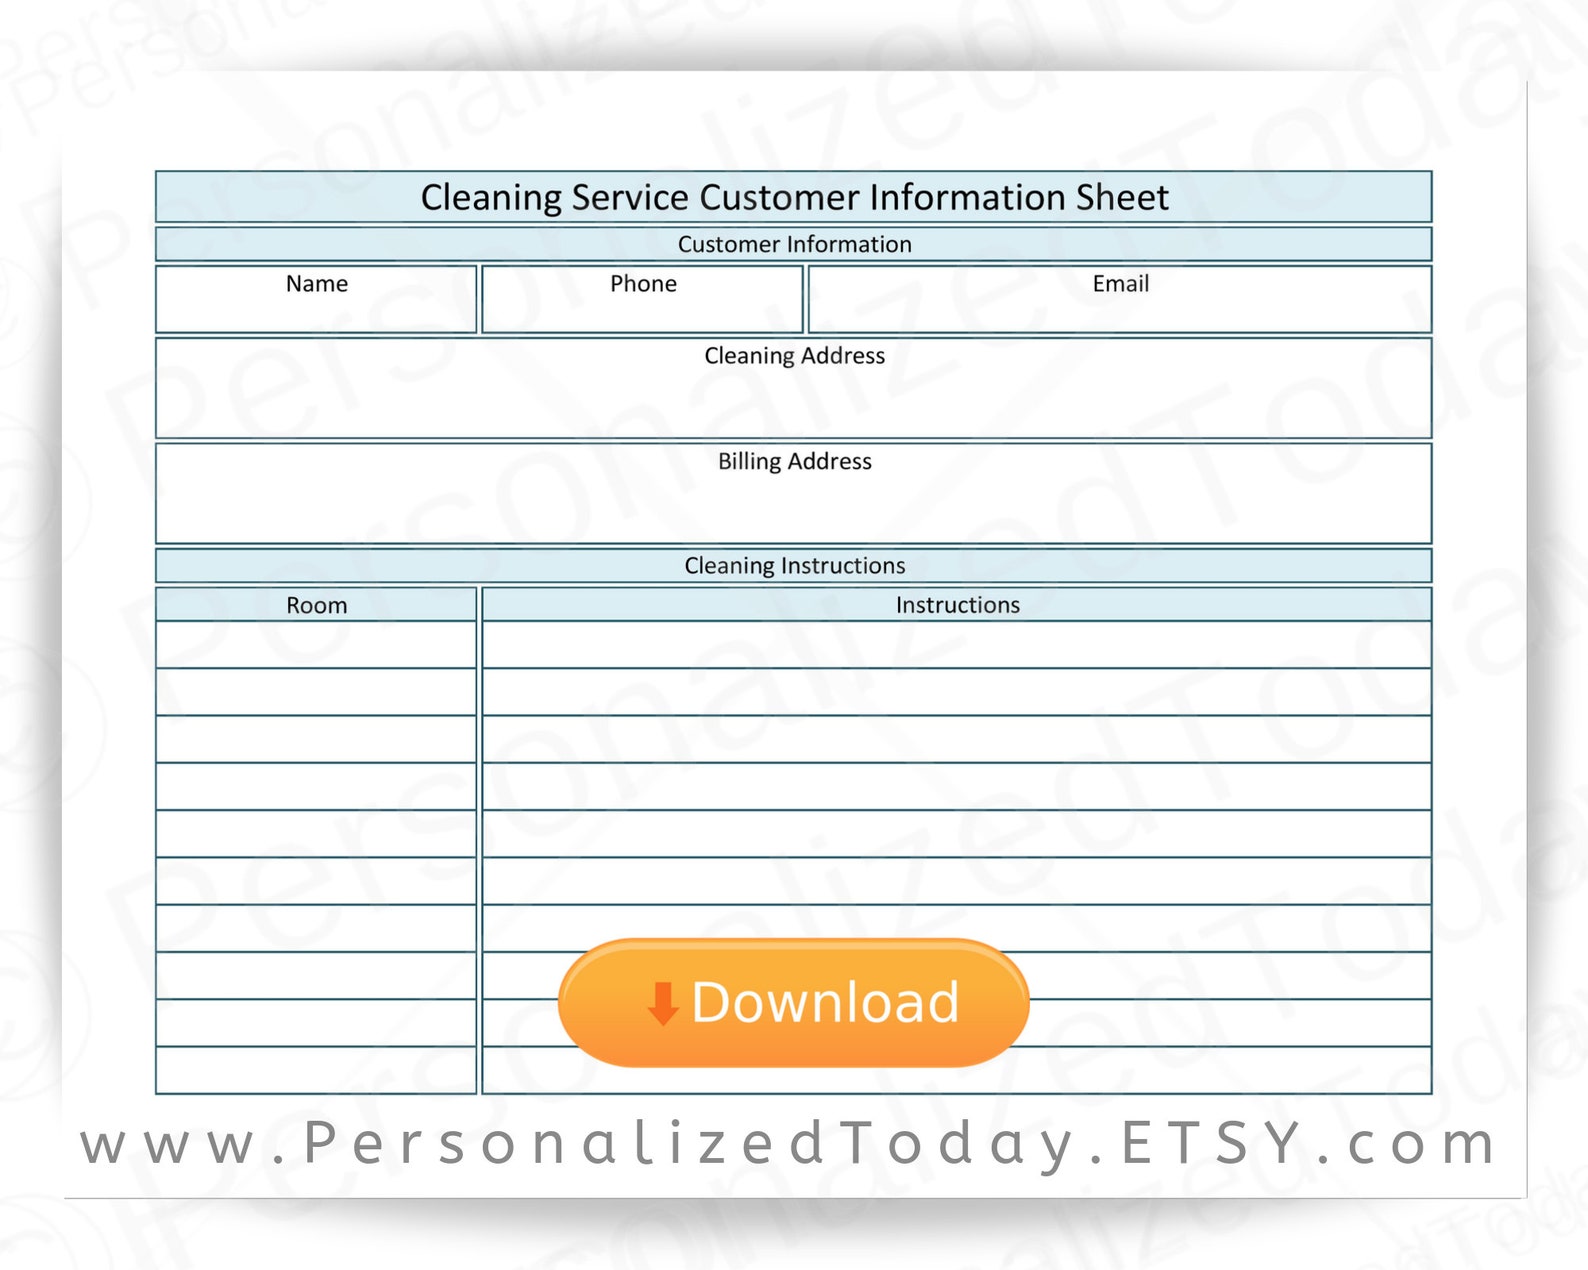 printable-cleaning-service-customer-information-sheet-us-etsy